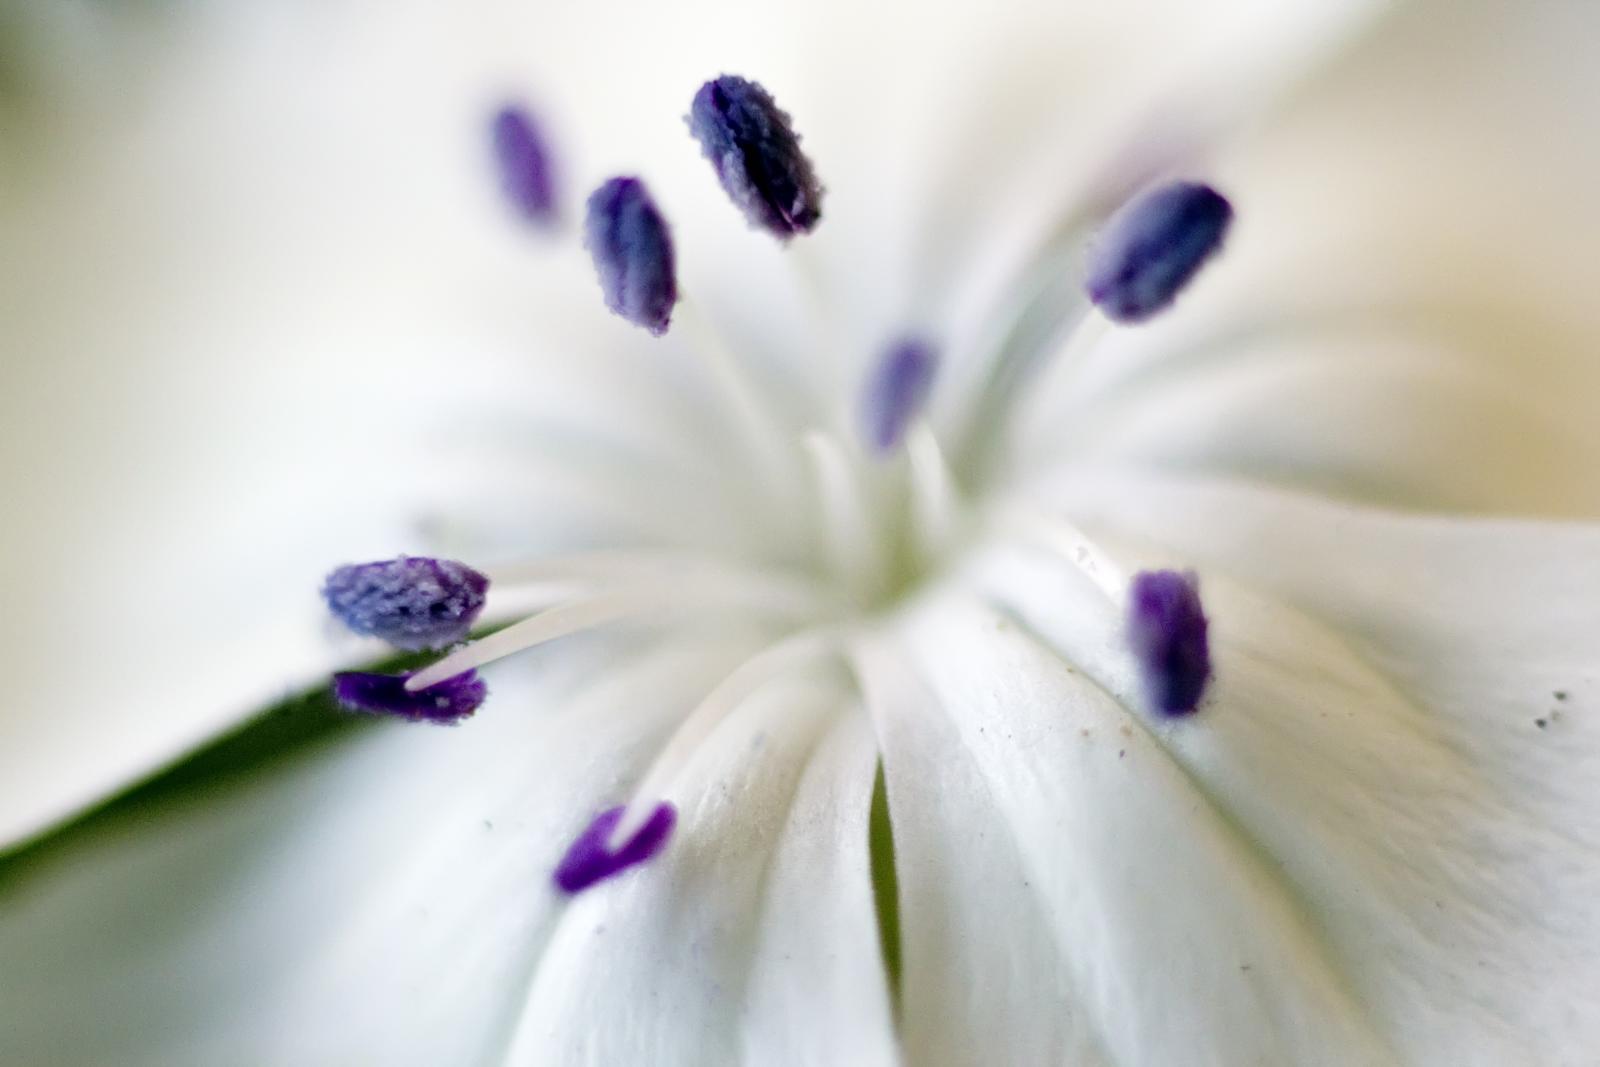 purple and white flower looking up in a lens